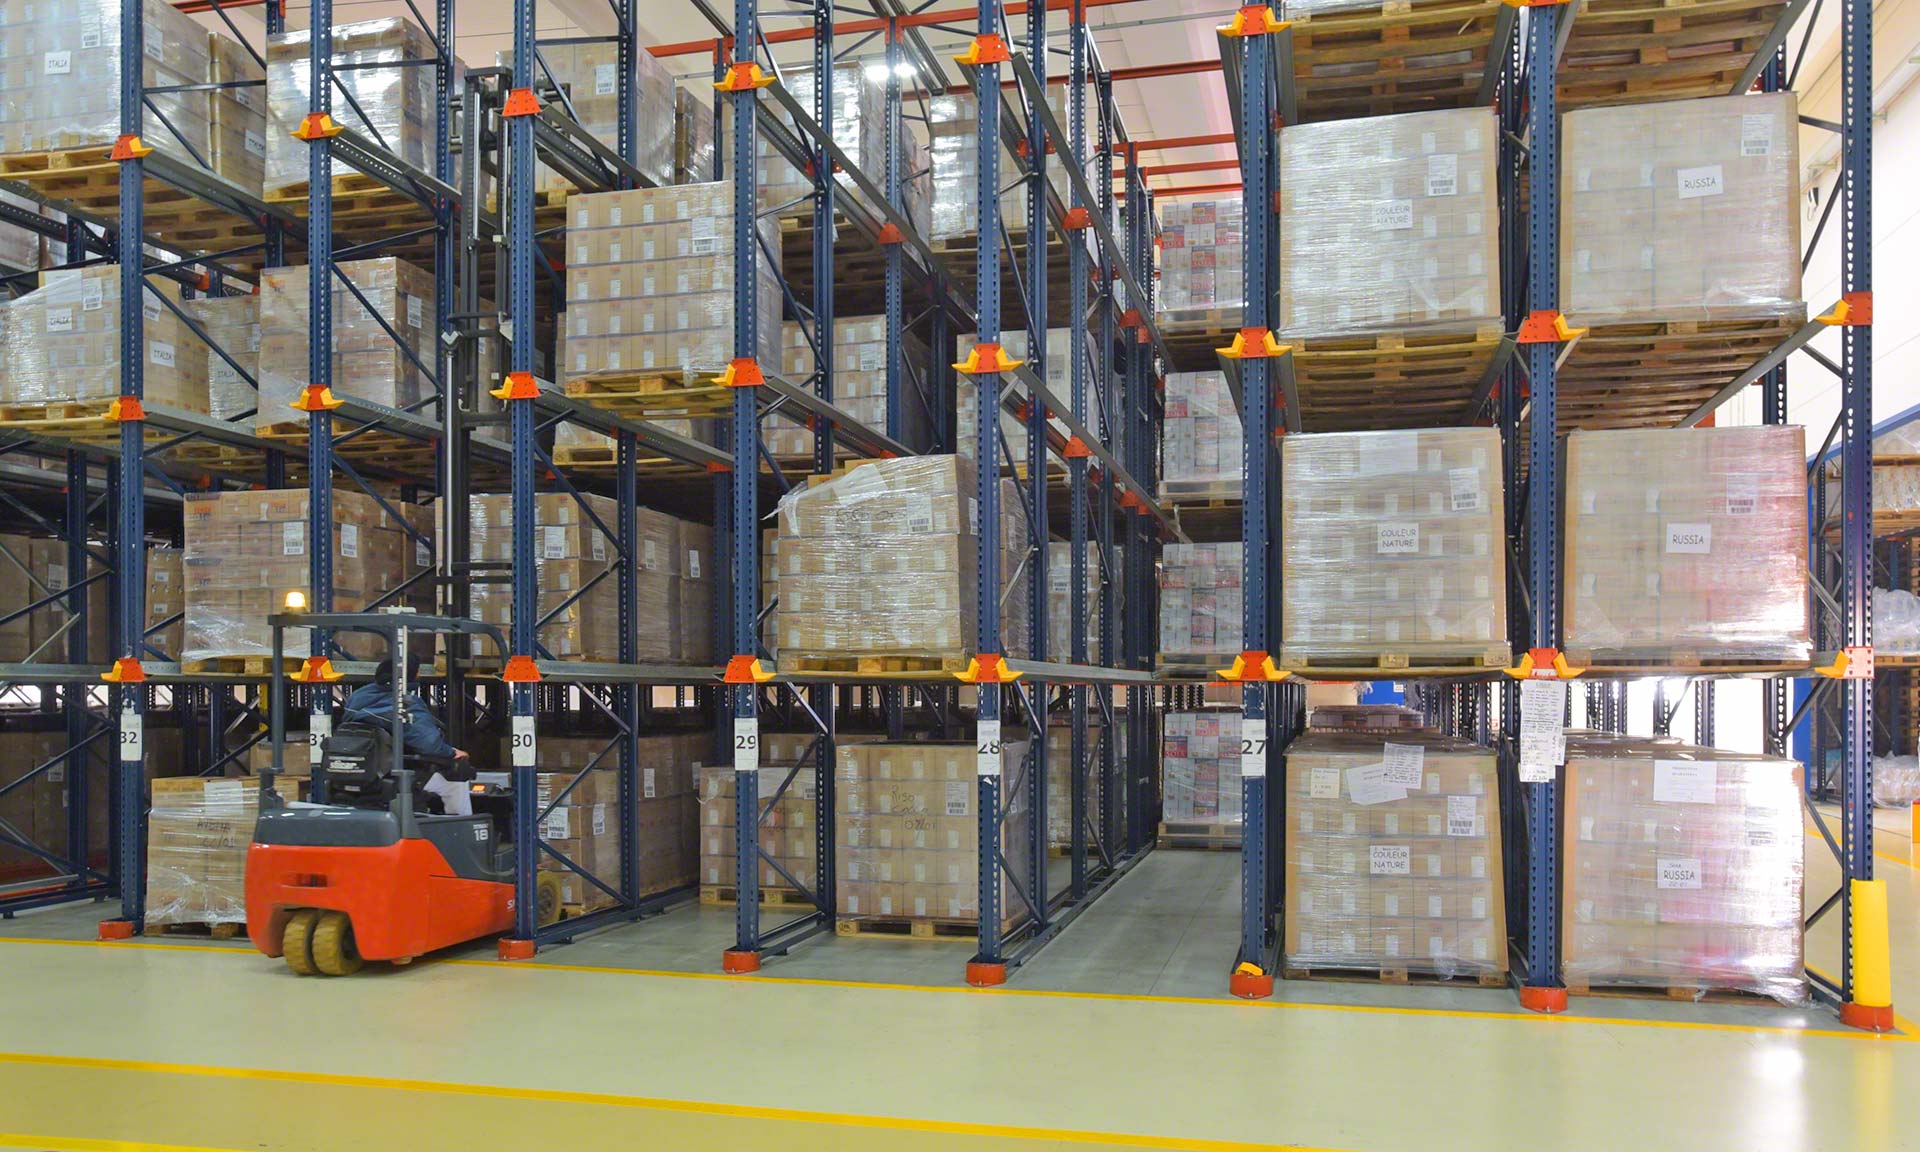 Honeycombing in the warehouse consists of the loss of effective space in the storage systems